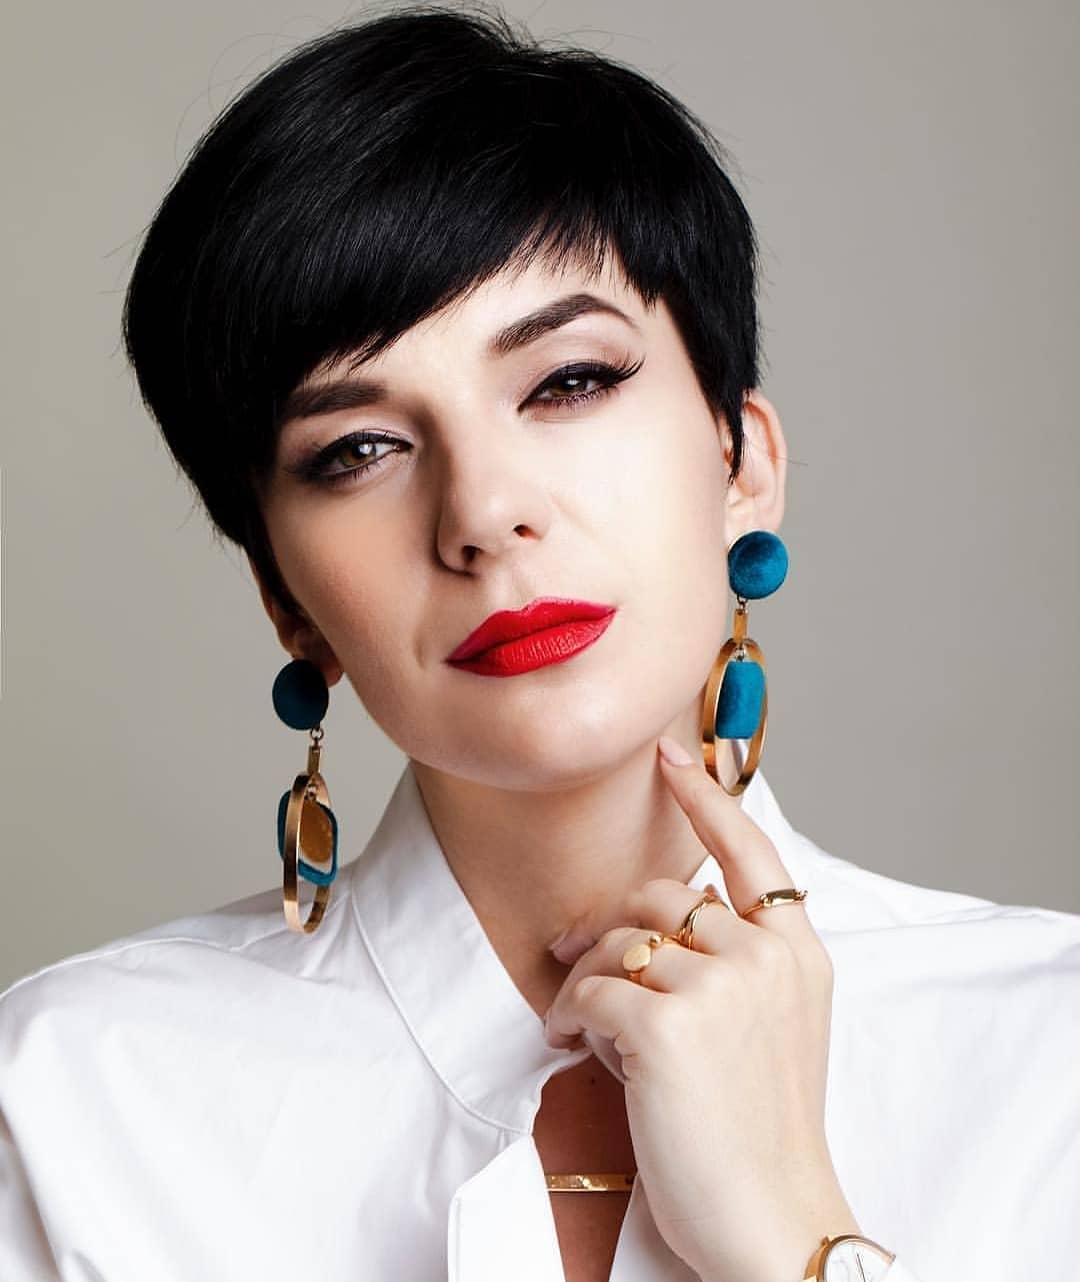 10 Trendy Short Hairstyles for Straight Hair - Pixie Haircut for Female